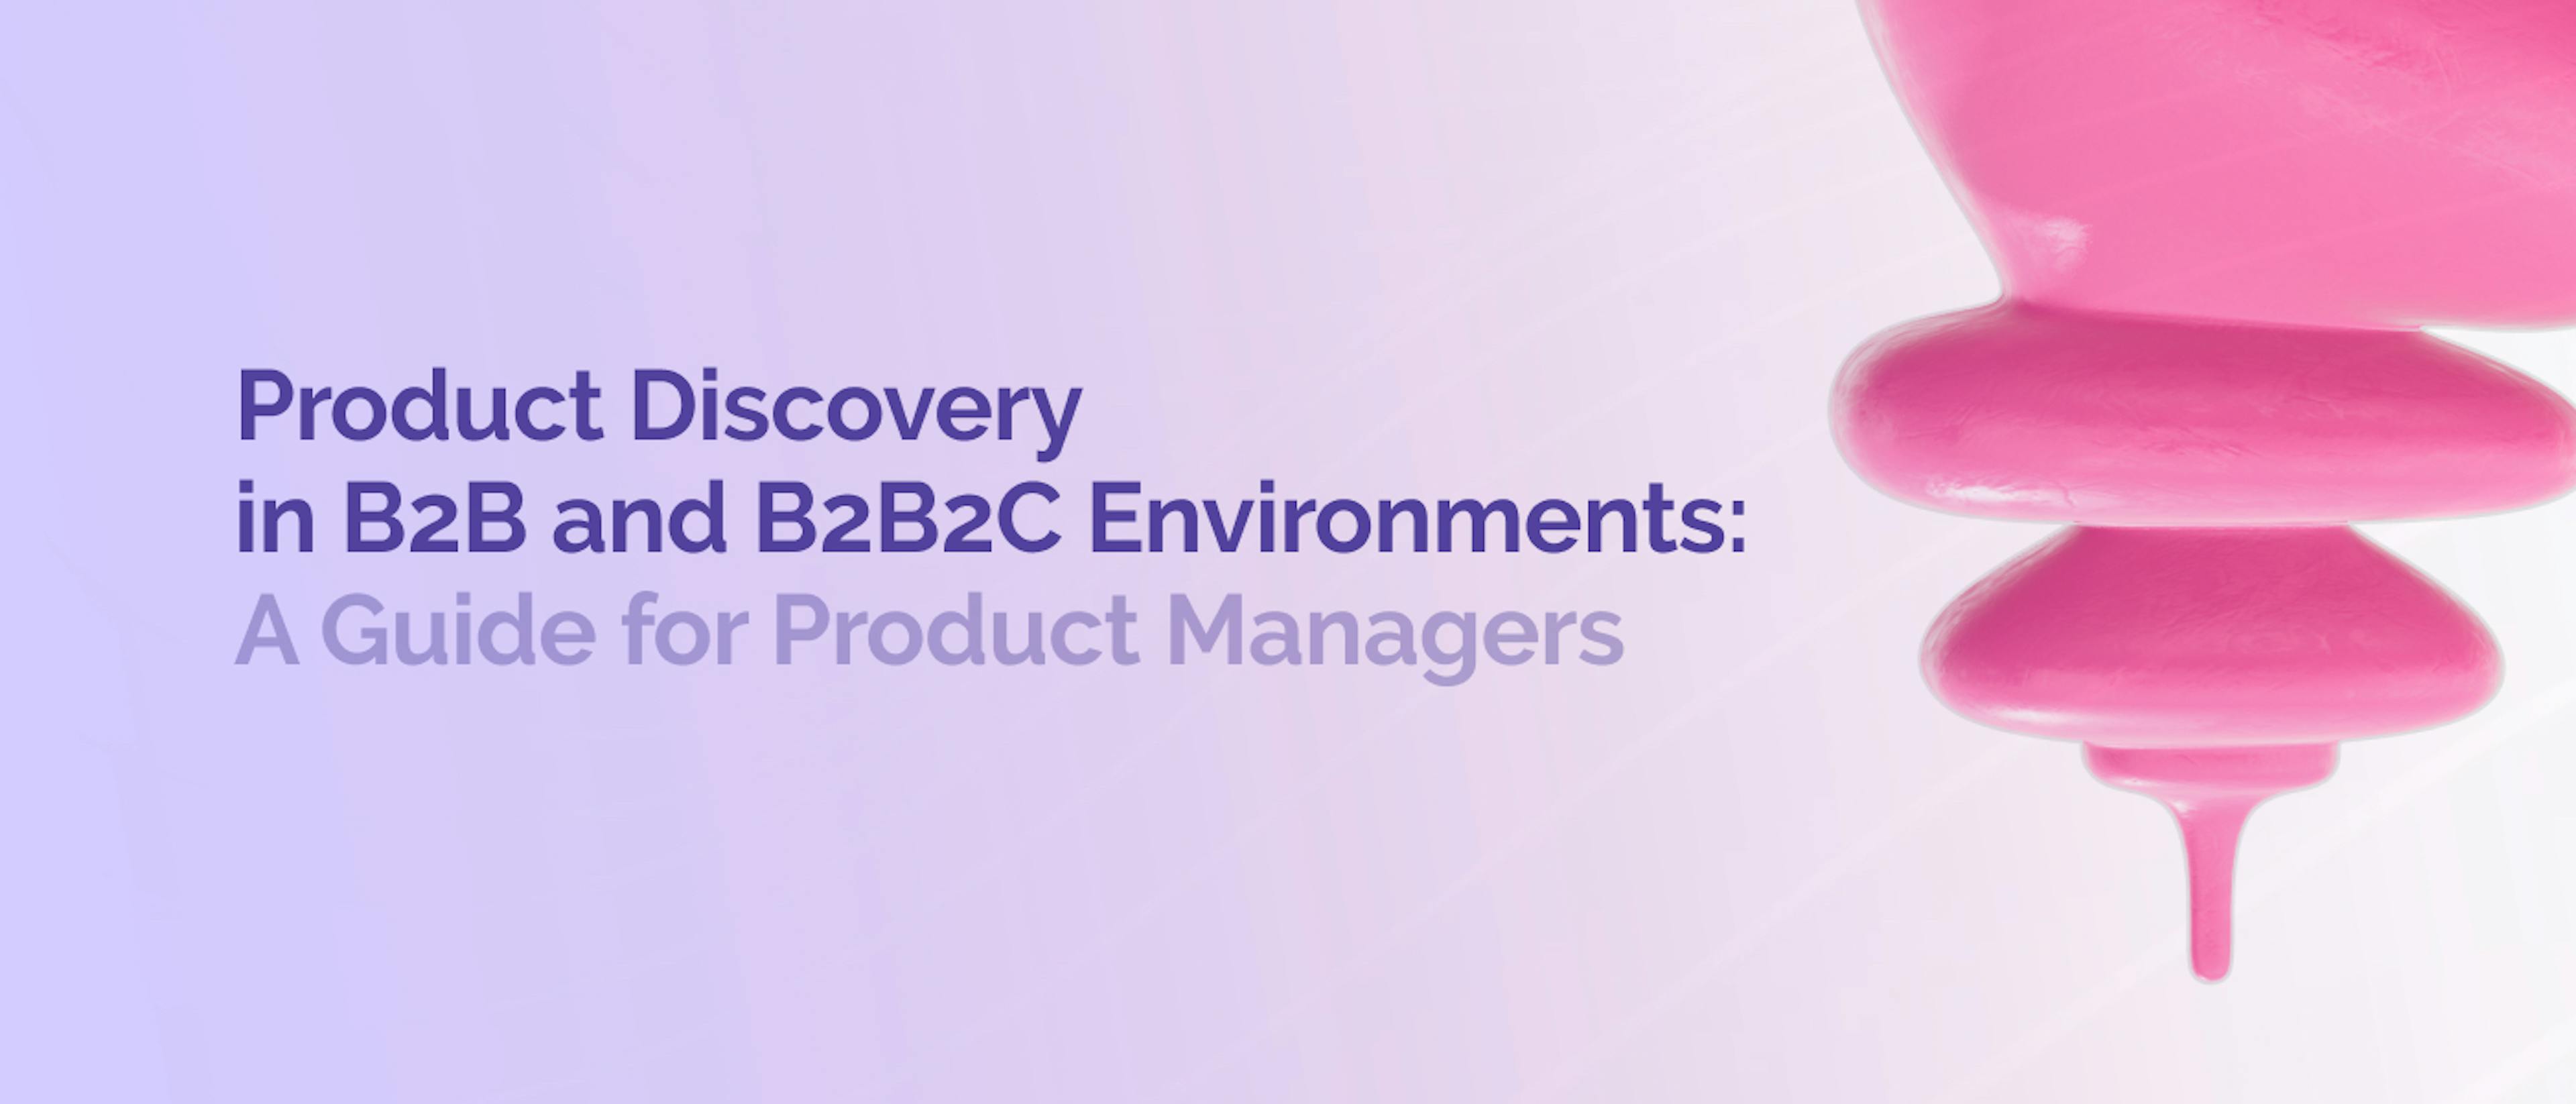 /product-discovery-in-b2b-and-b2b2c-environments-a-guide-for-product-managers feature image